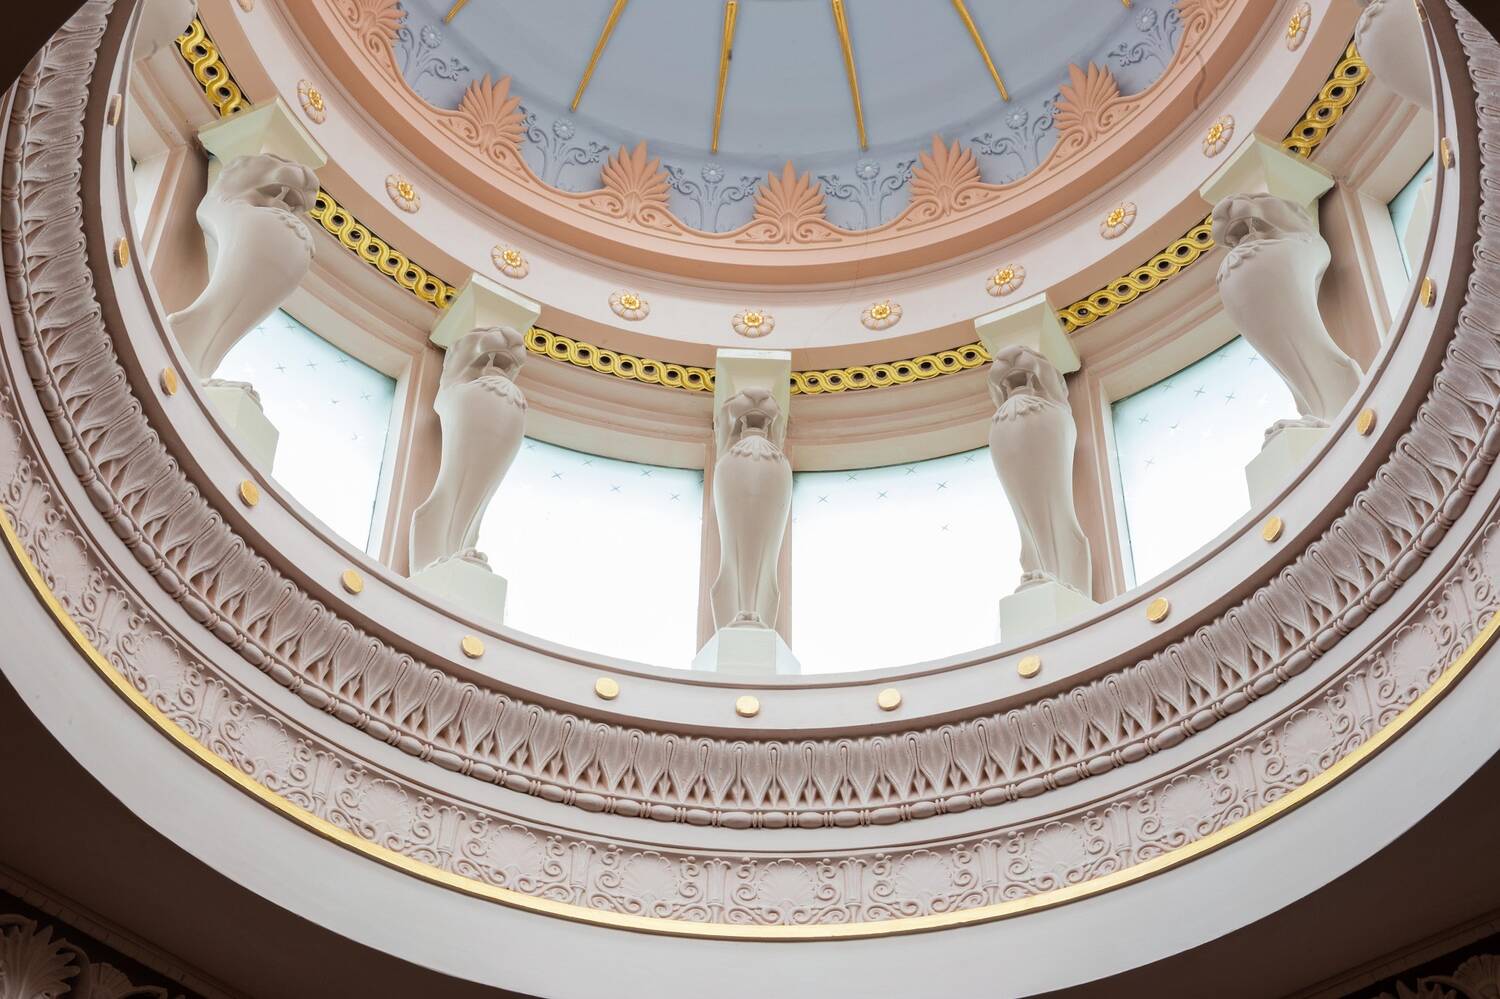 A view of the inside of a painted dome, with blue and gold decoration at the very top. Statues separate small window panels all the way around.